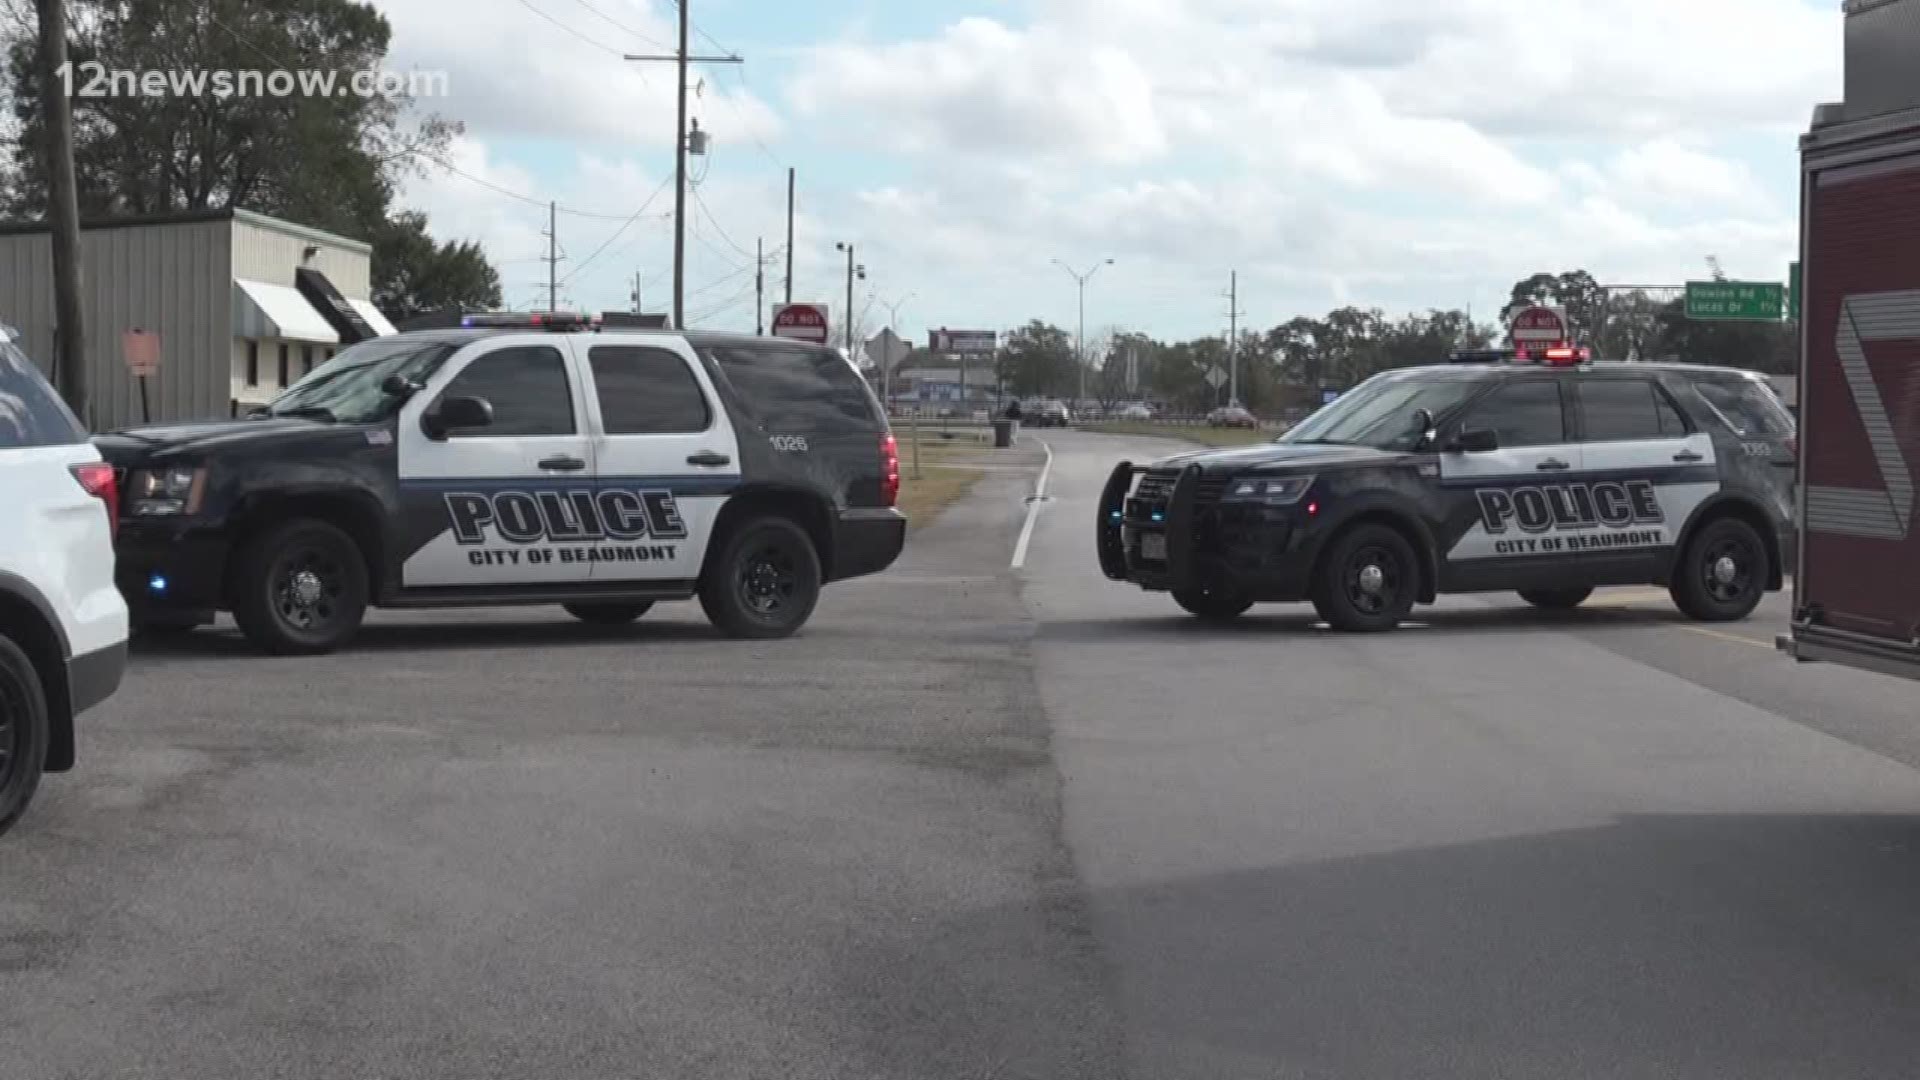 Beaumont Police respond to more than 10 bomb threats Thursday that could be linked to nationwide threats